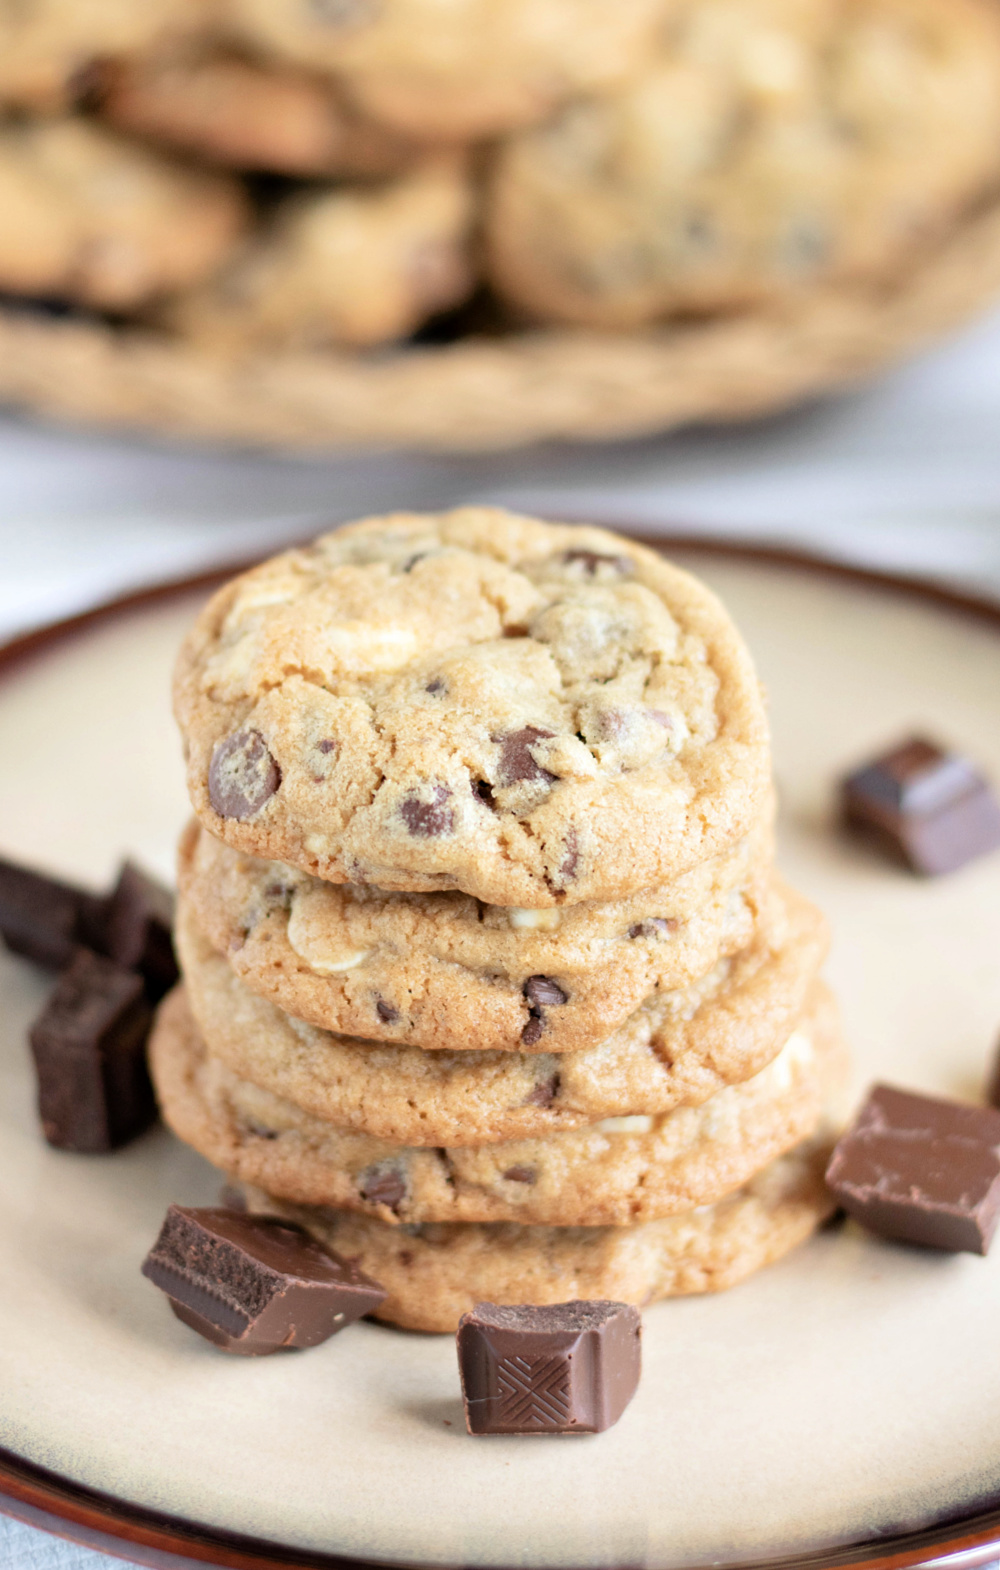 How to Make this Triple Chocolate Chip Cookies Recipe